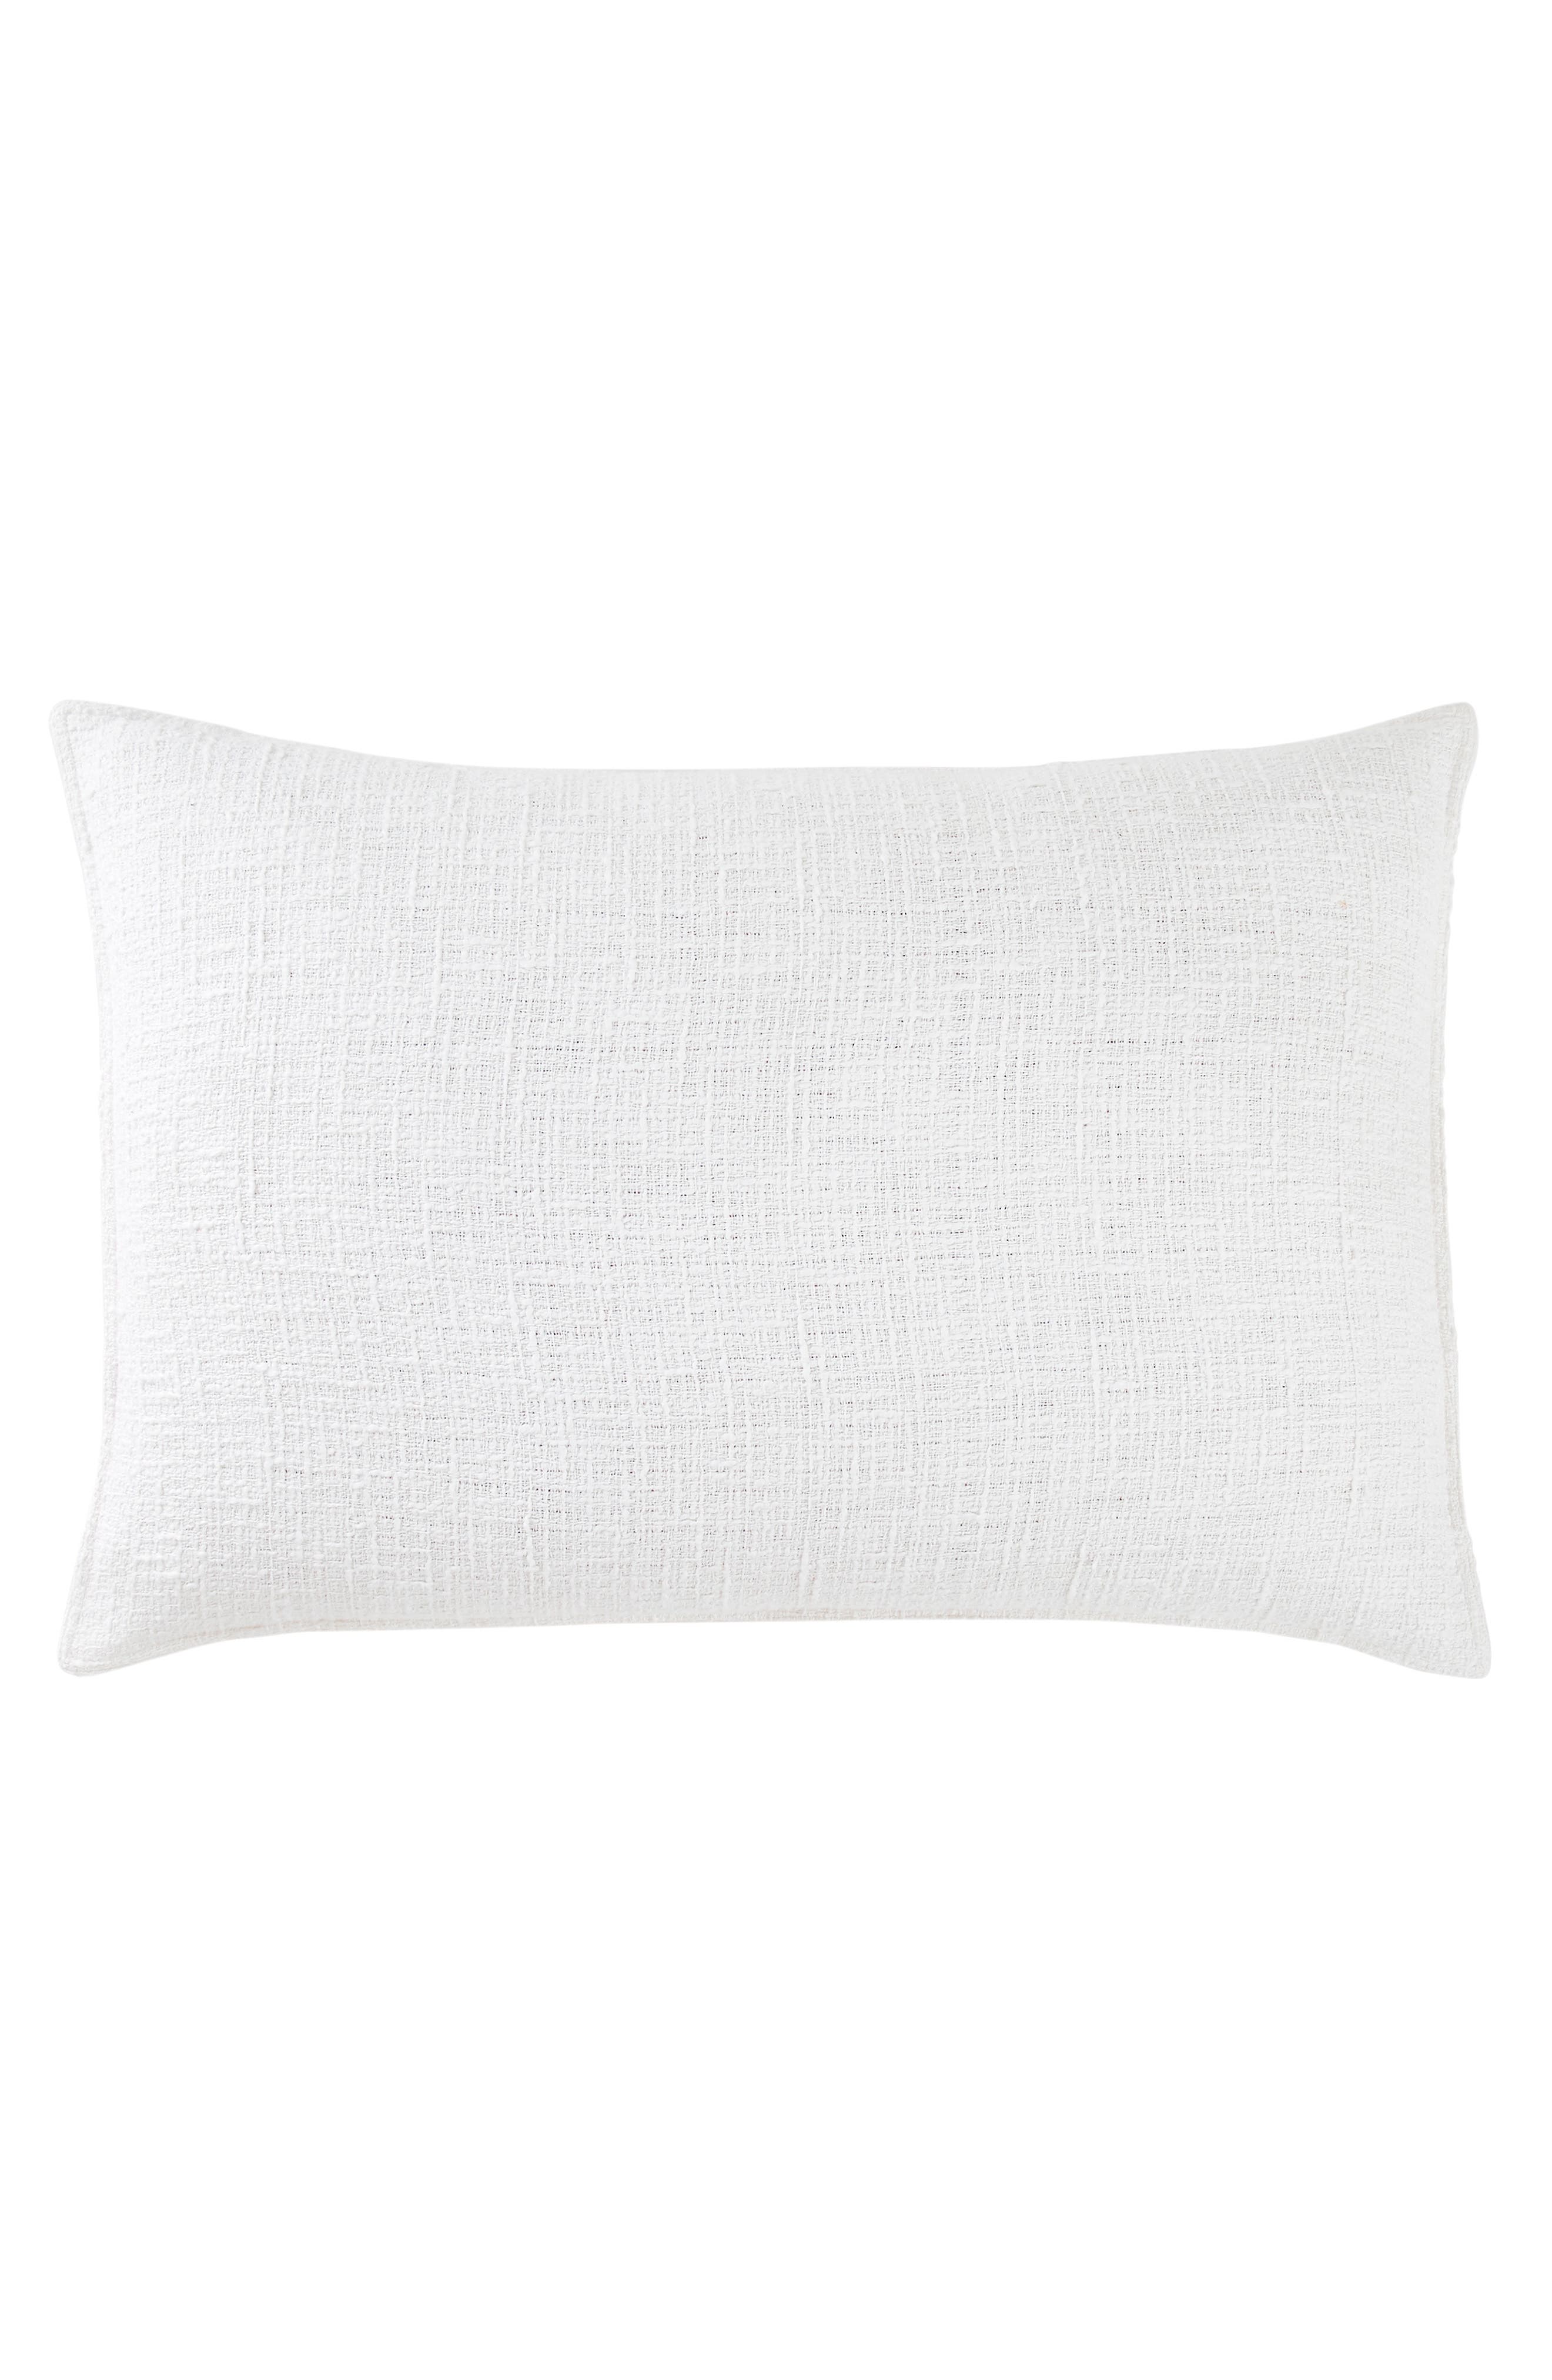 DKNY Pure Texture Sham in White at Nordstrom, Size Standard